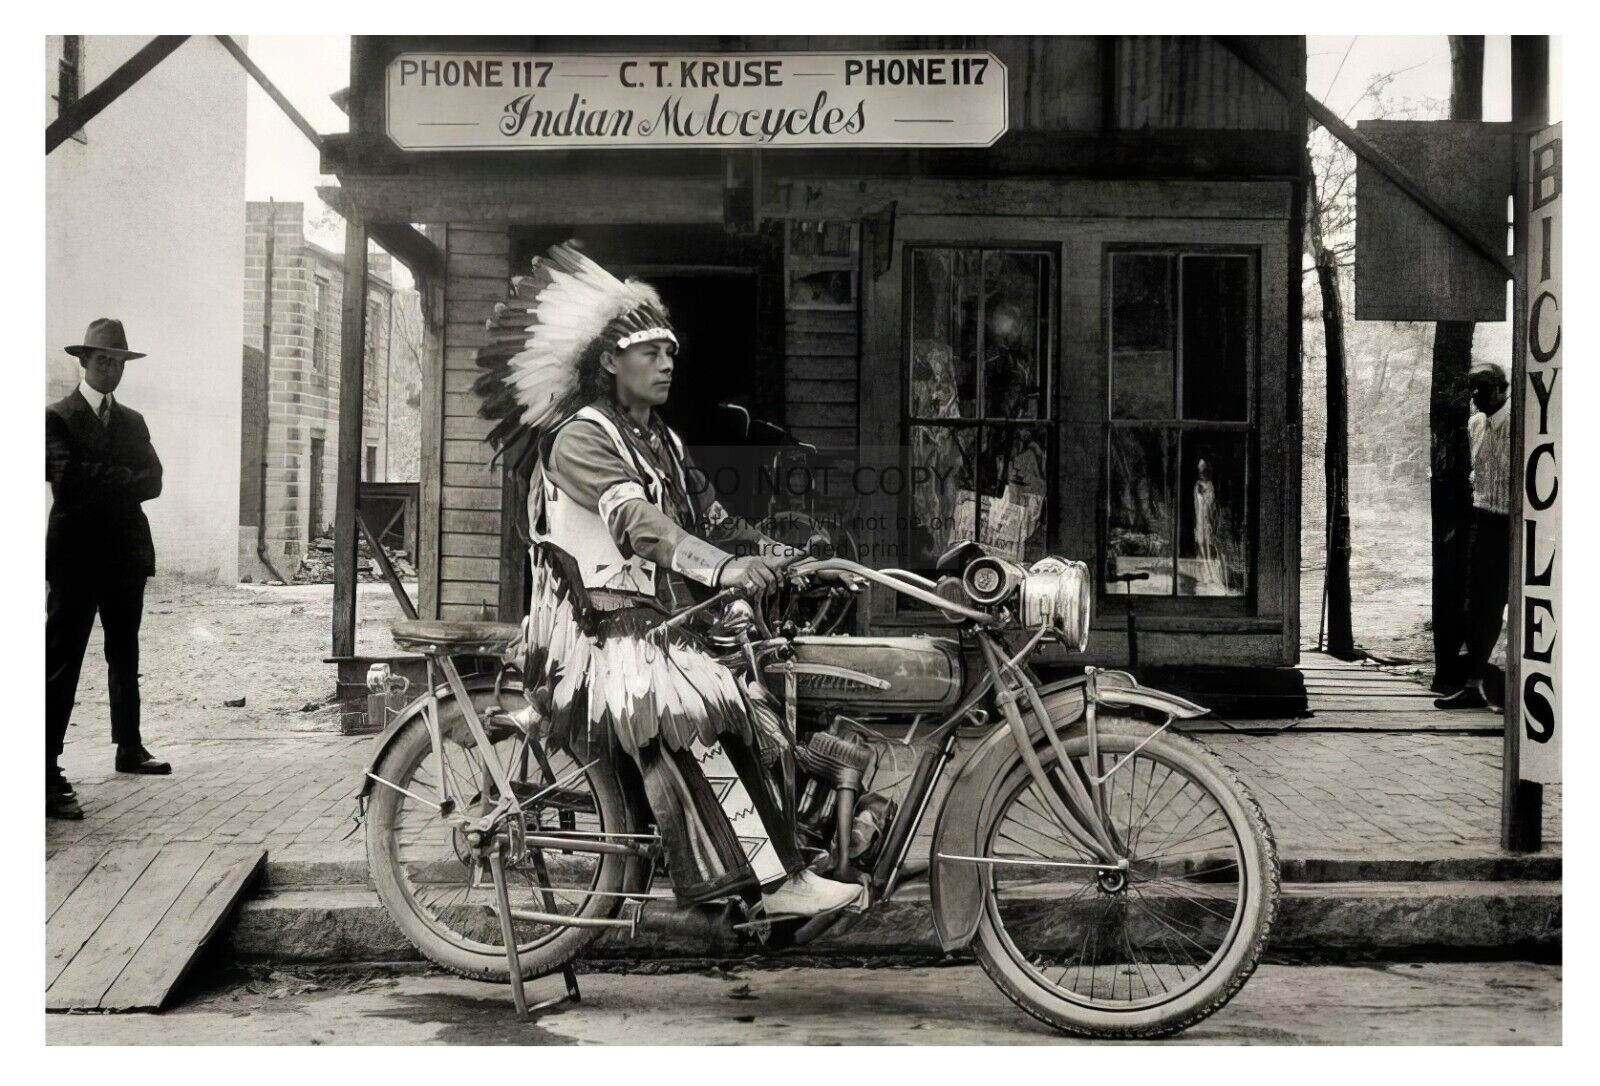 NATIVE AMERICAN CHIEF RIDING MOTORCYCLE OUTSIDE STORE 4X6 PHOTO